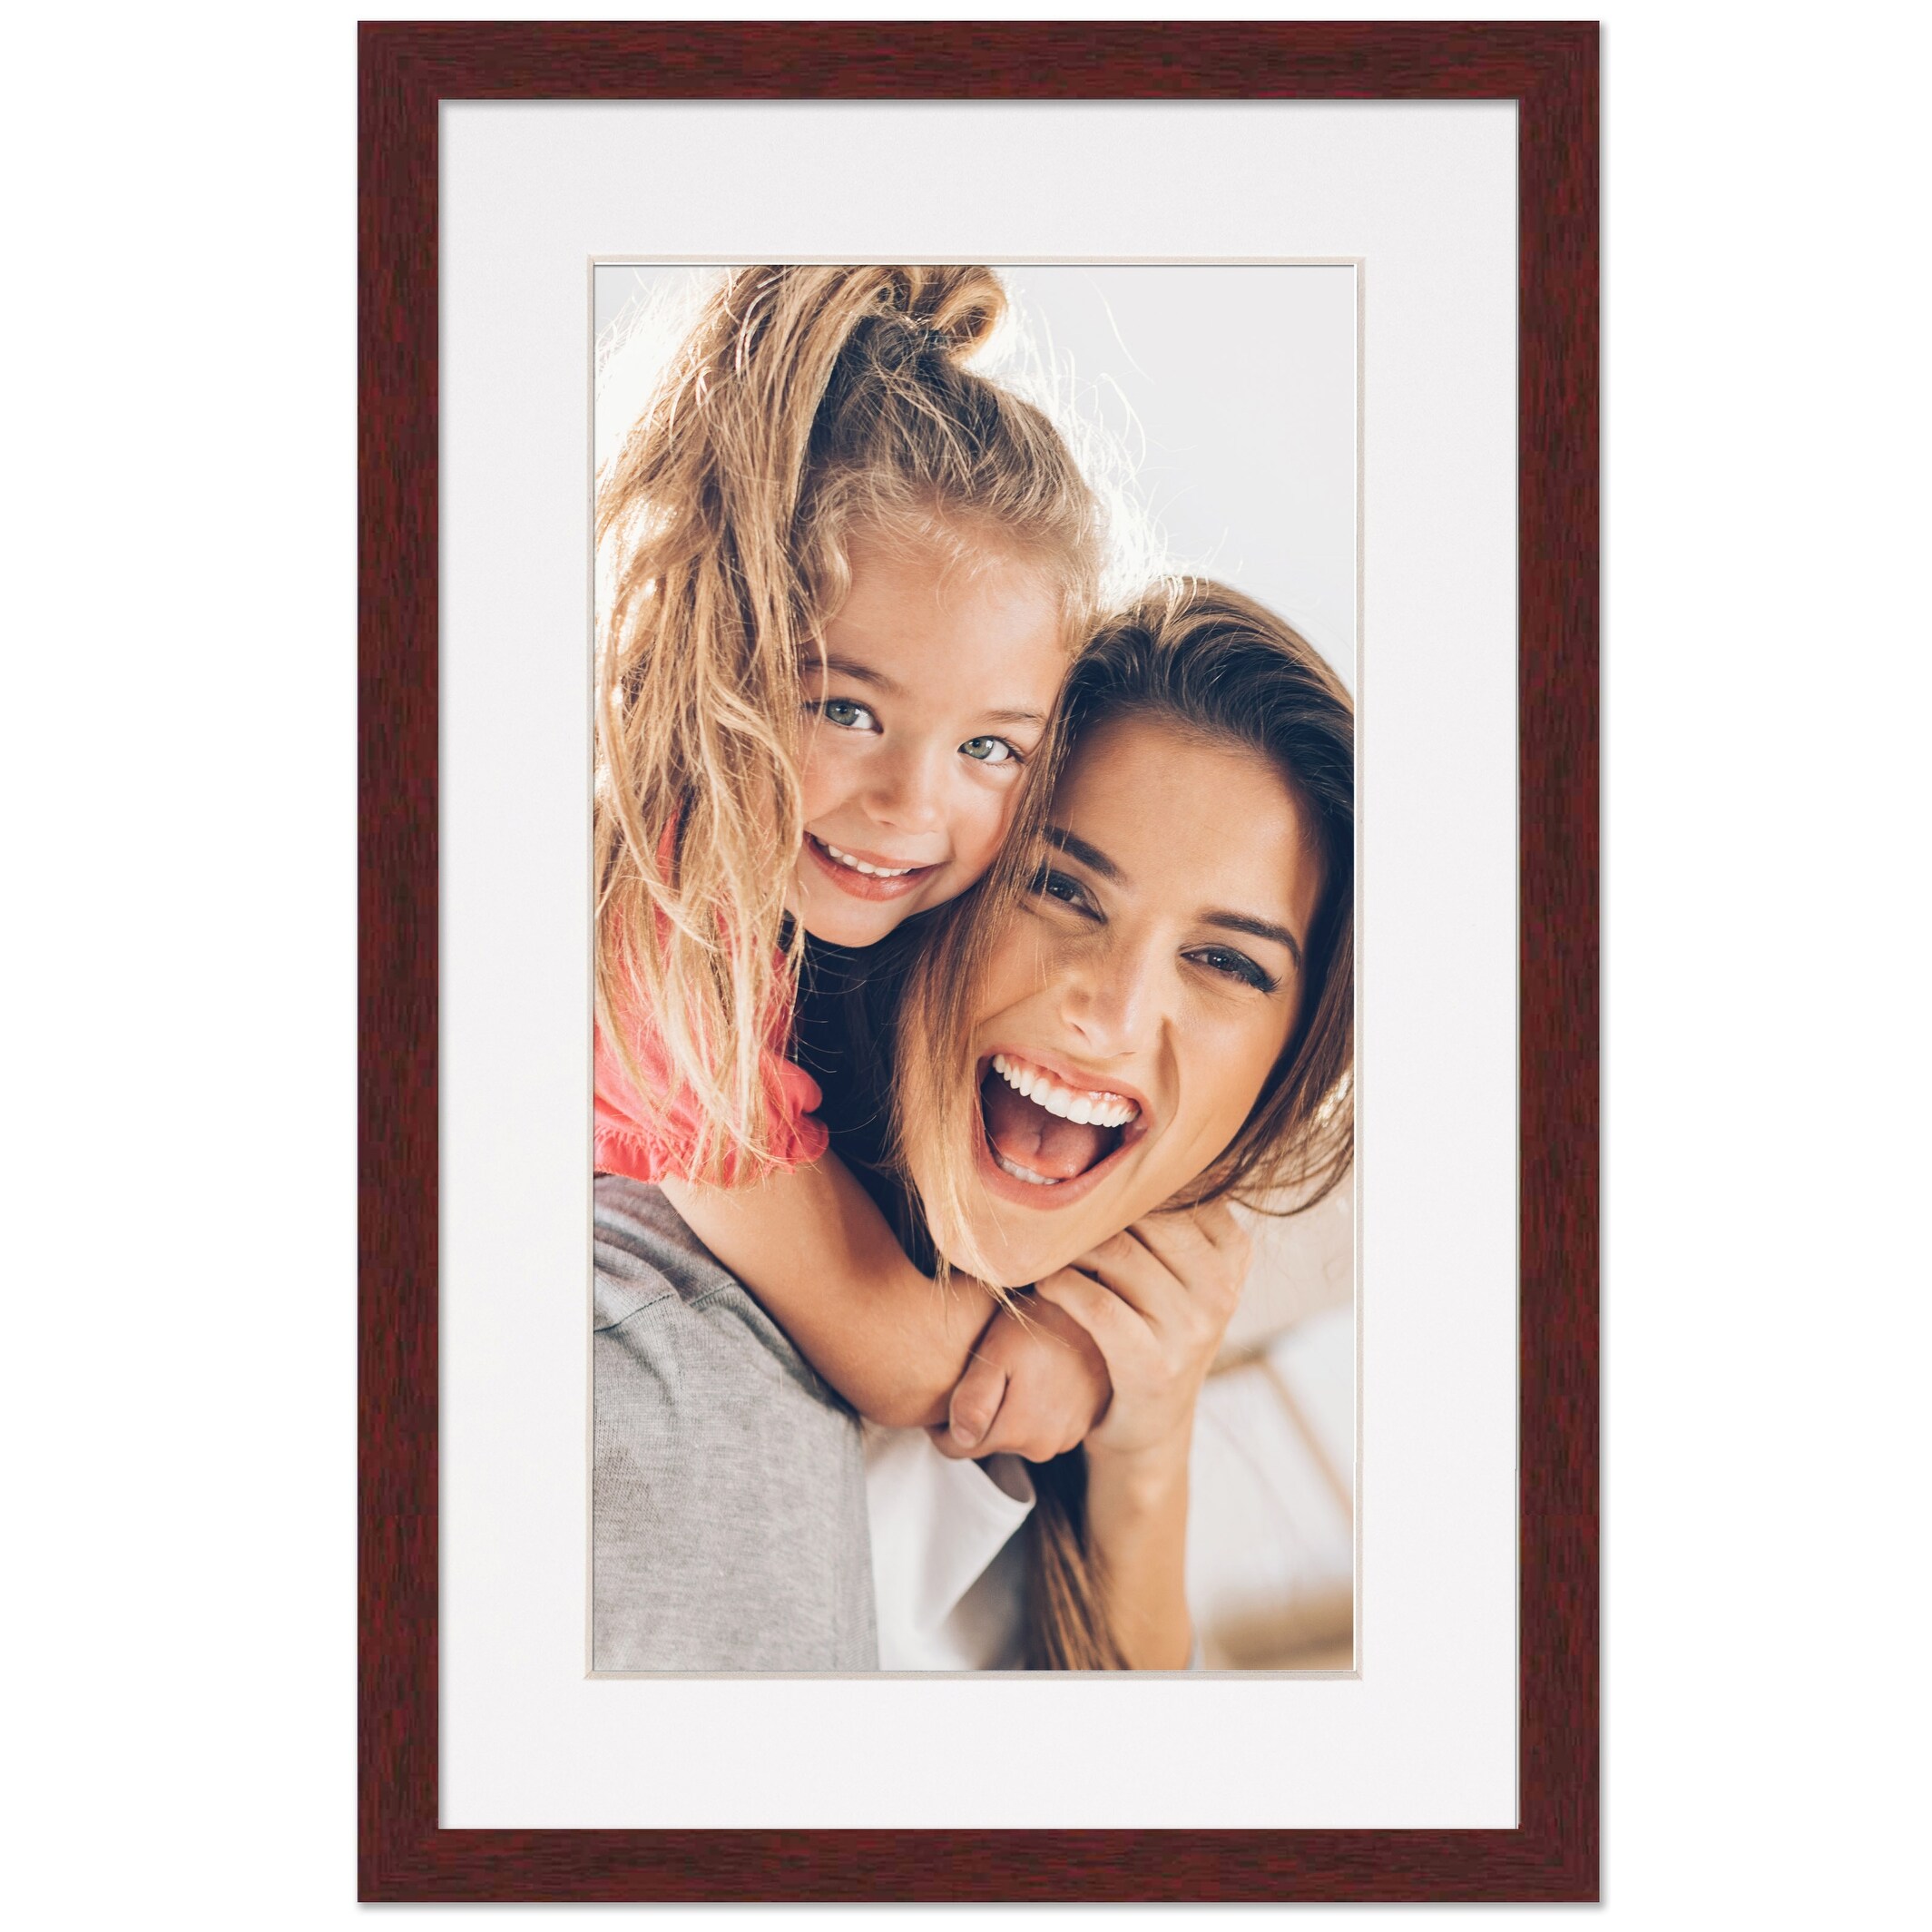 4x4 Frame with Mat - Brown 8x8 Frame Wood Made to Display Print or Poster  Measuring 4 x 4 Inches with White Photo Mat - On Sale - Bed Bath & Beyond -  38564880